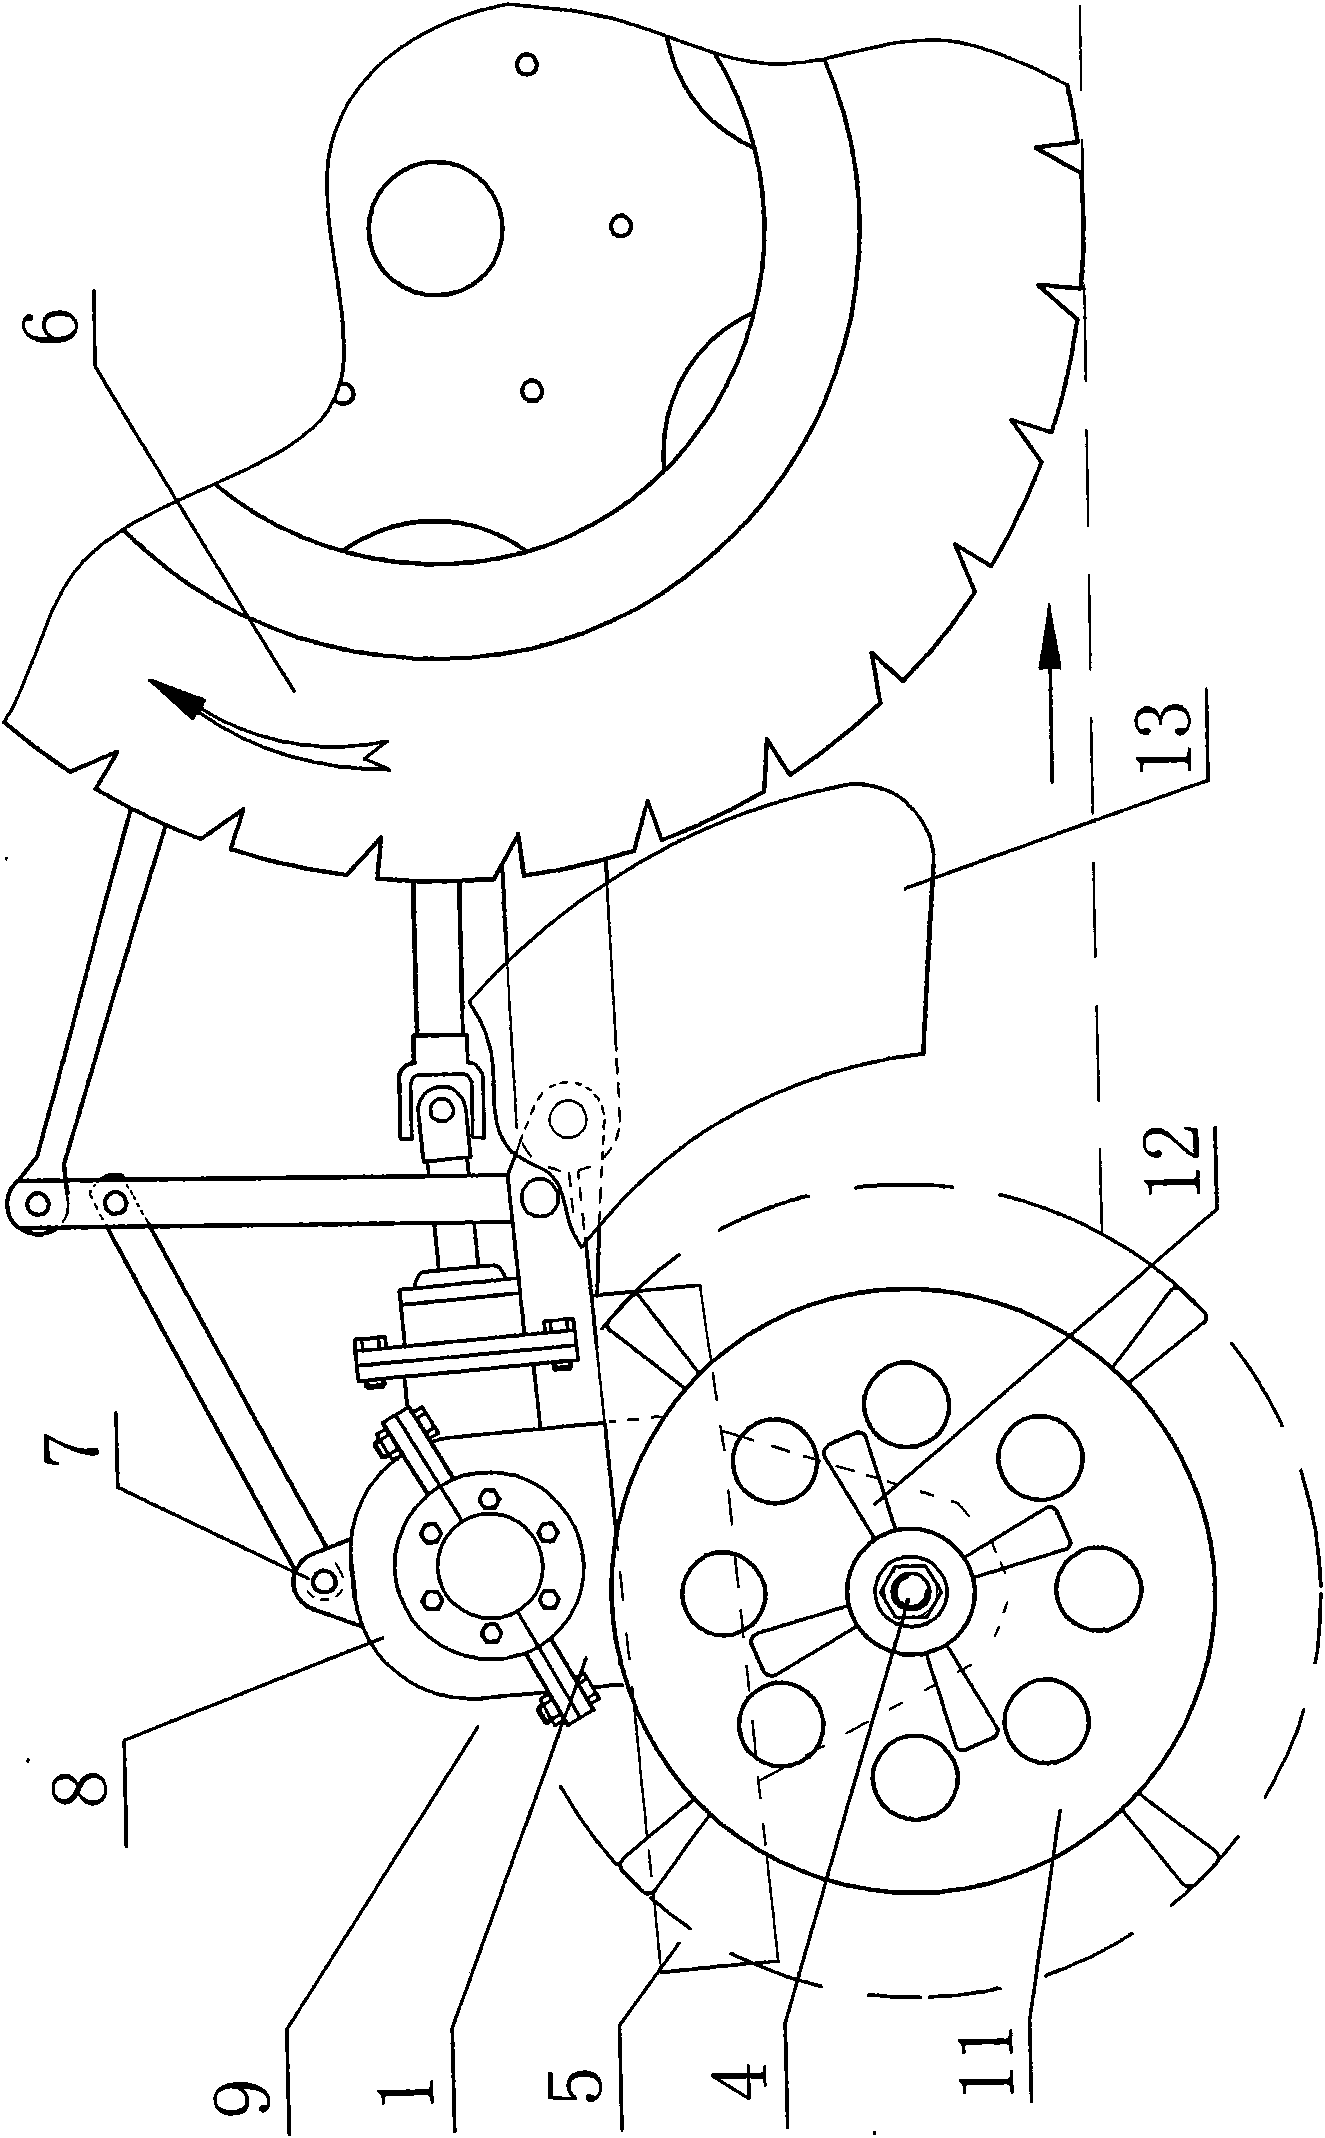 Multifunction rotavator, speed change gear box thereof capable of reversing easily and extending shaft thereof